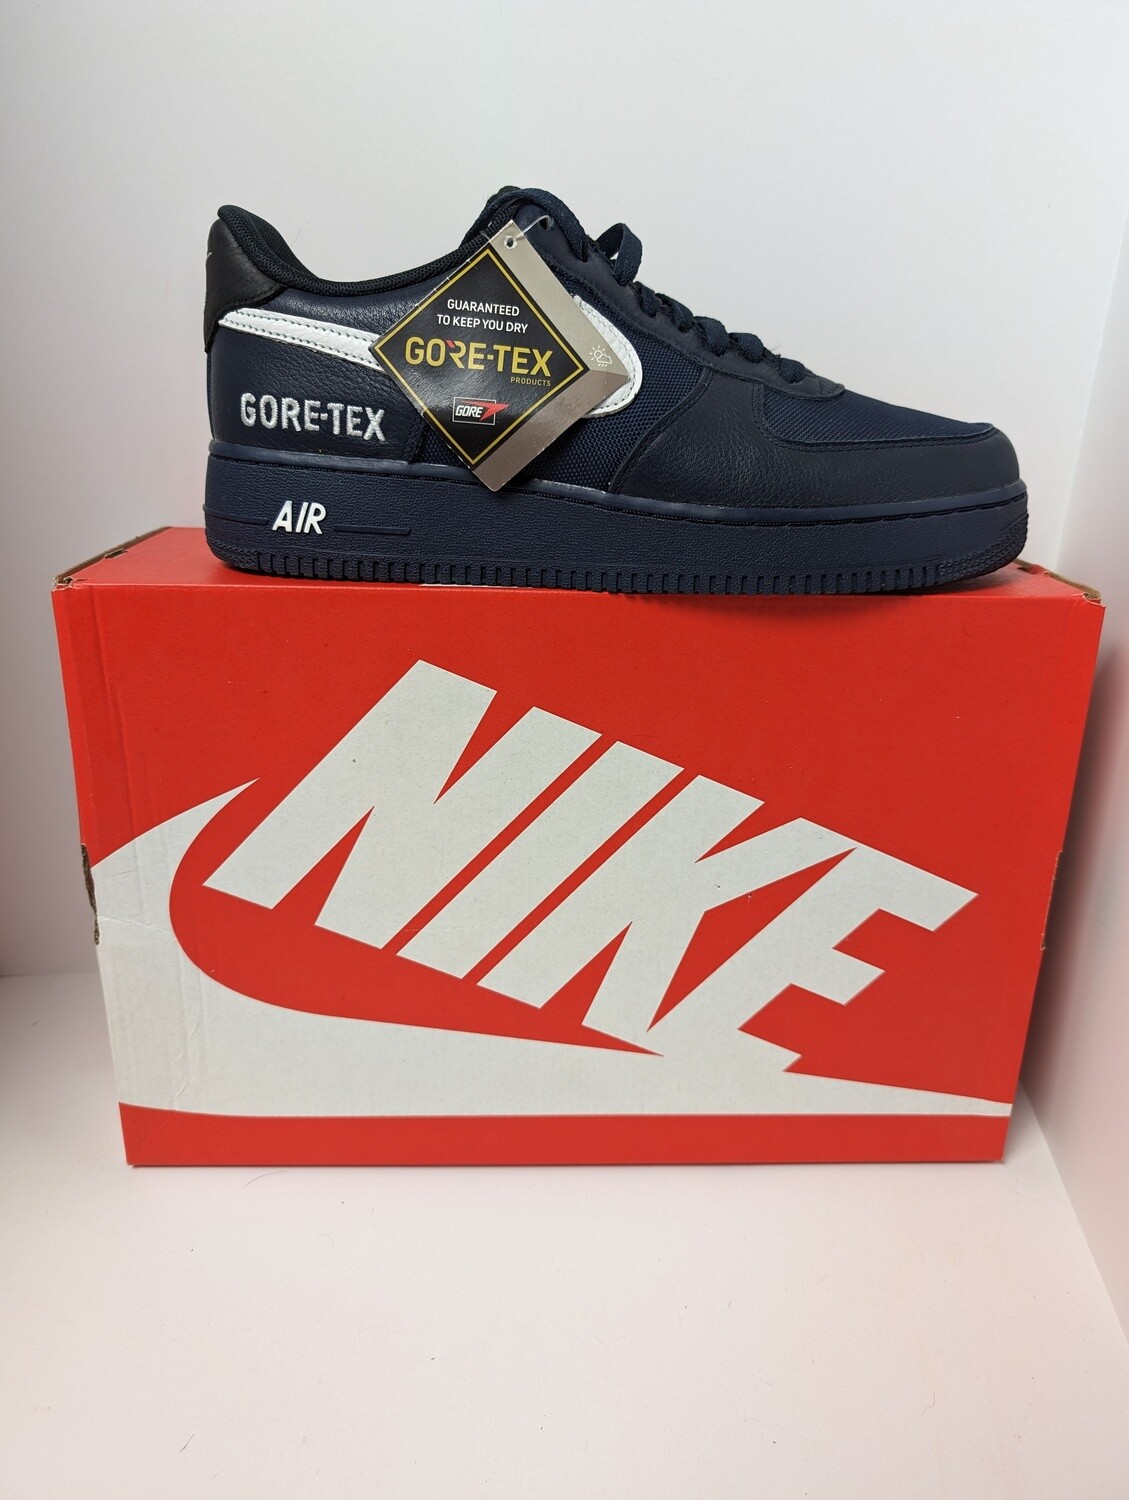 Nike Gore-Tex Air Force 1 In Navy Blue with White Swoosh Logo